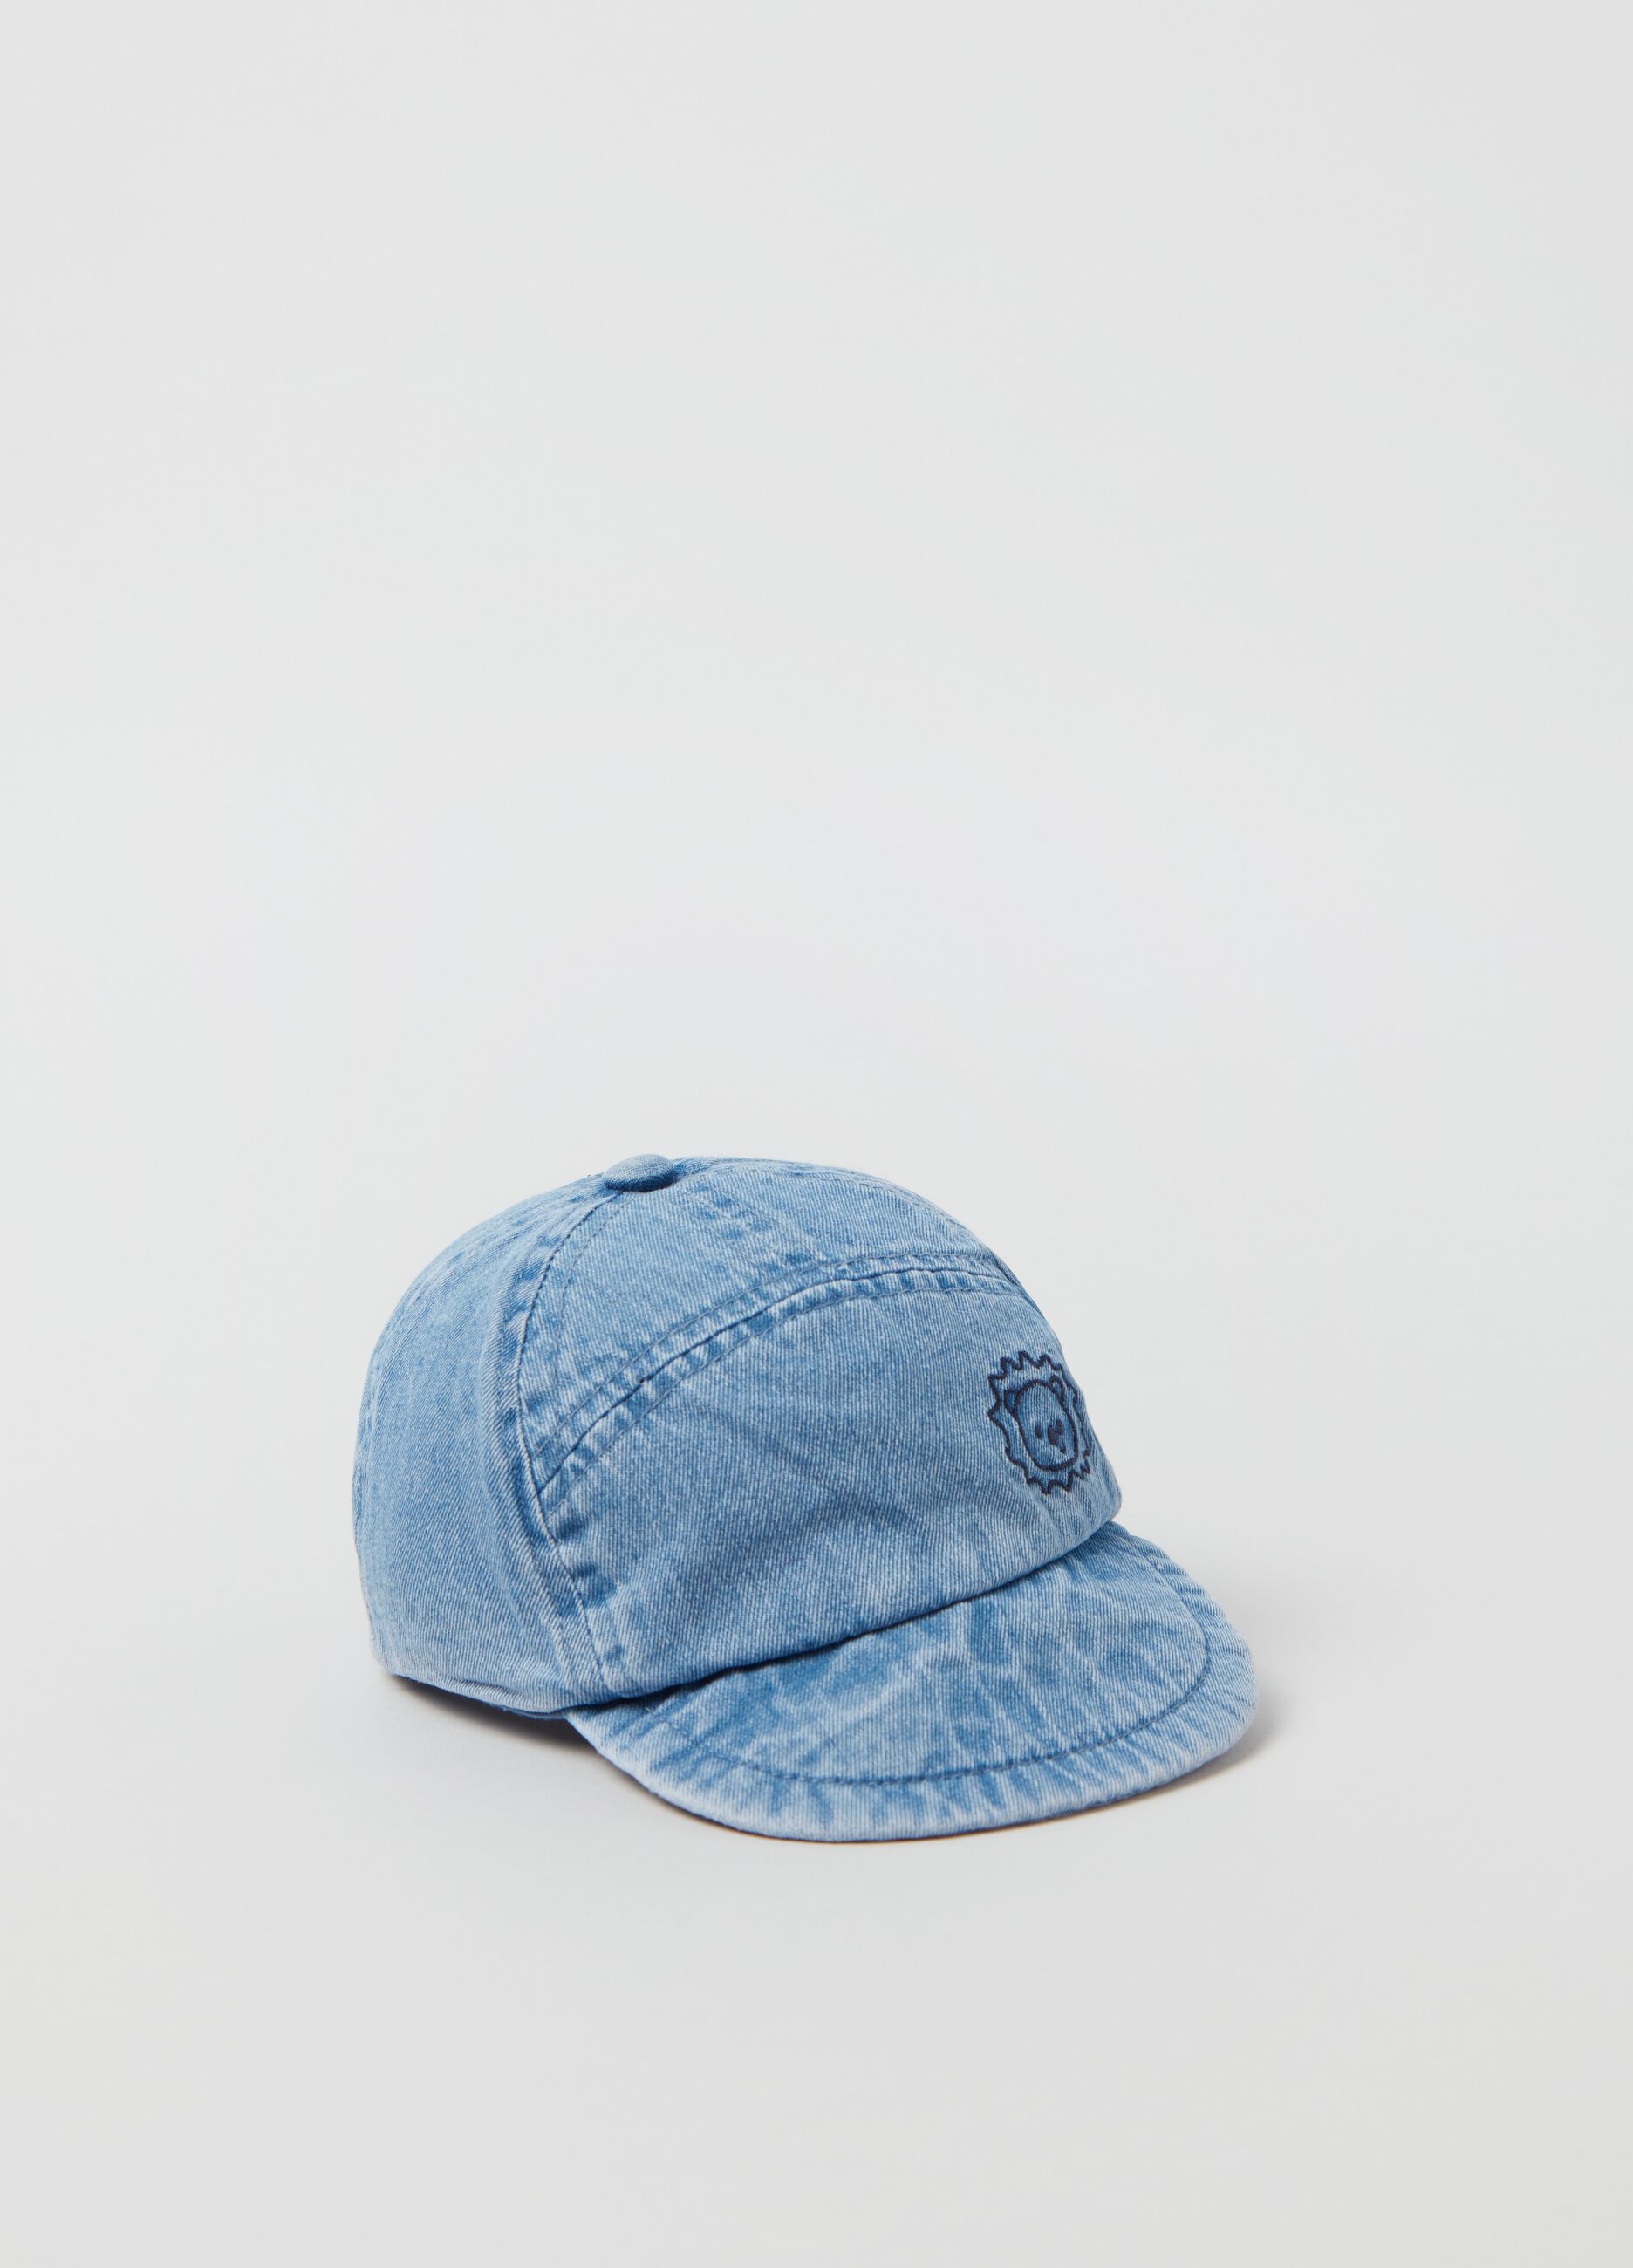 Baseball cap with lion embroidery